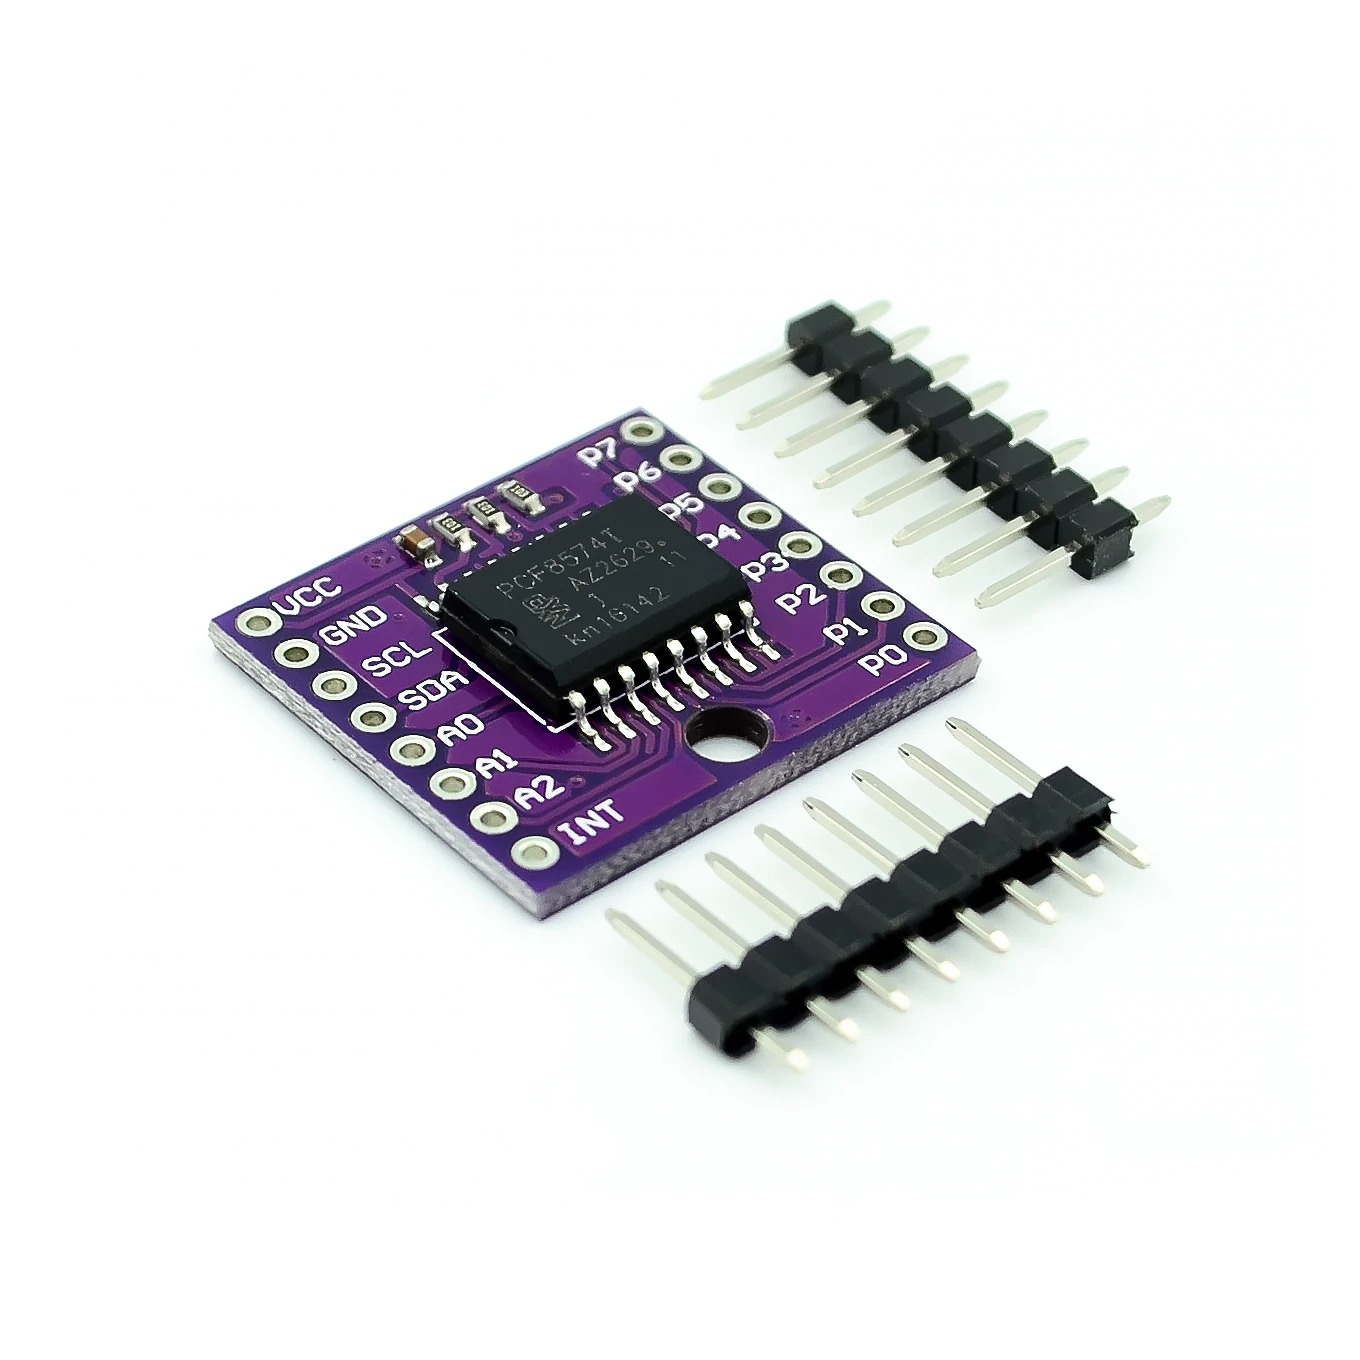 PCF8574 PCF8574T I/O For I2C IIC Port Interface Arduino Expansion Board